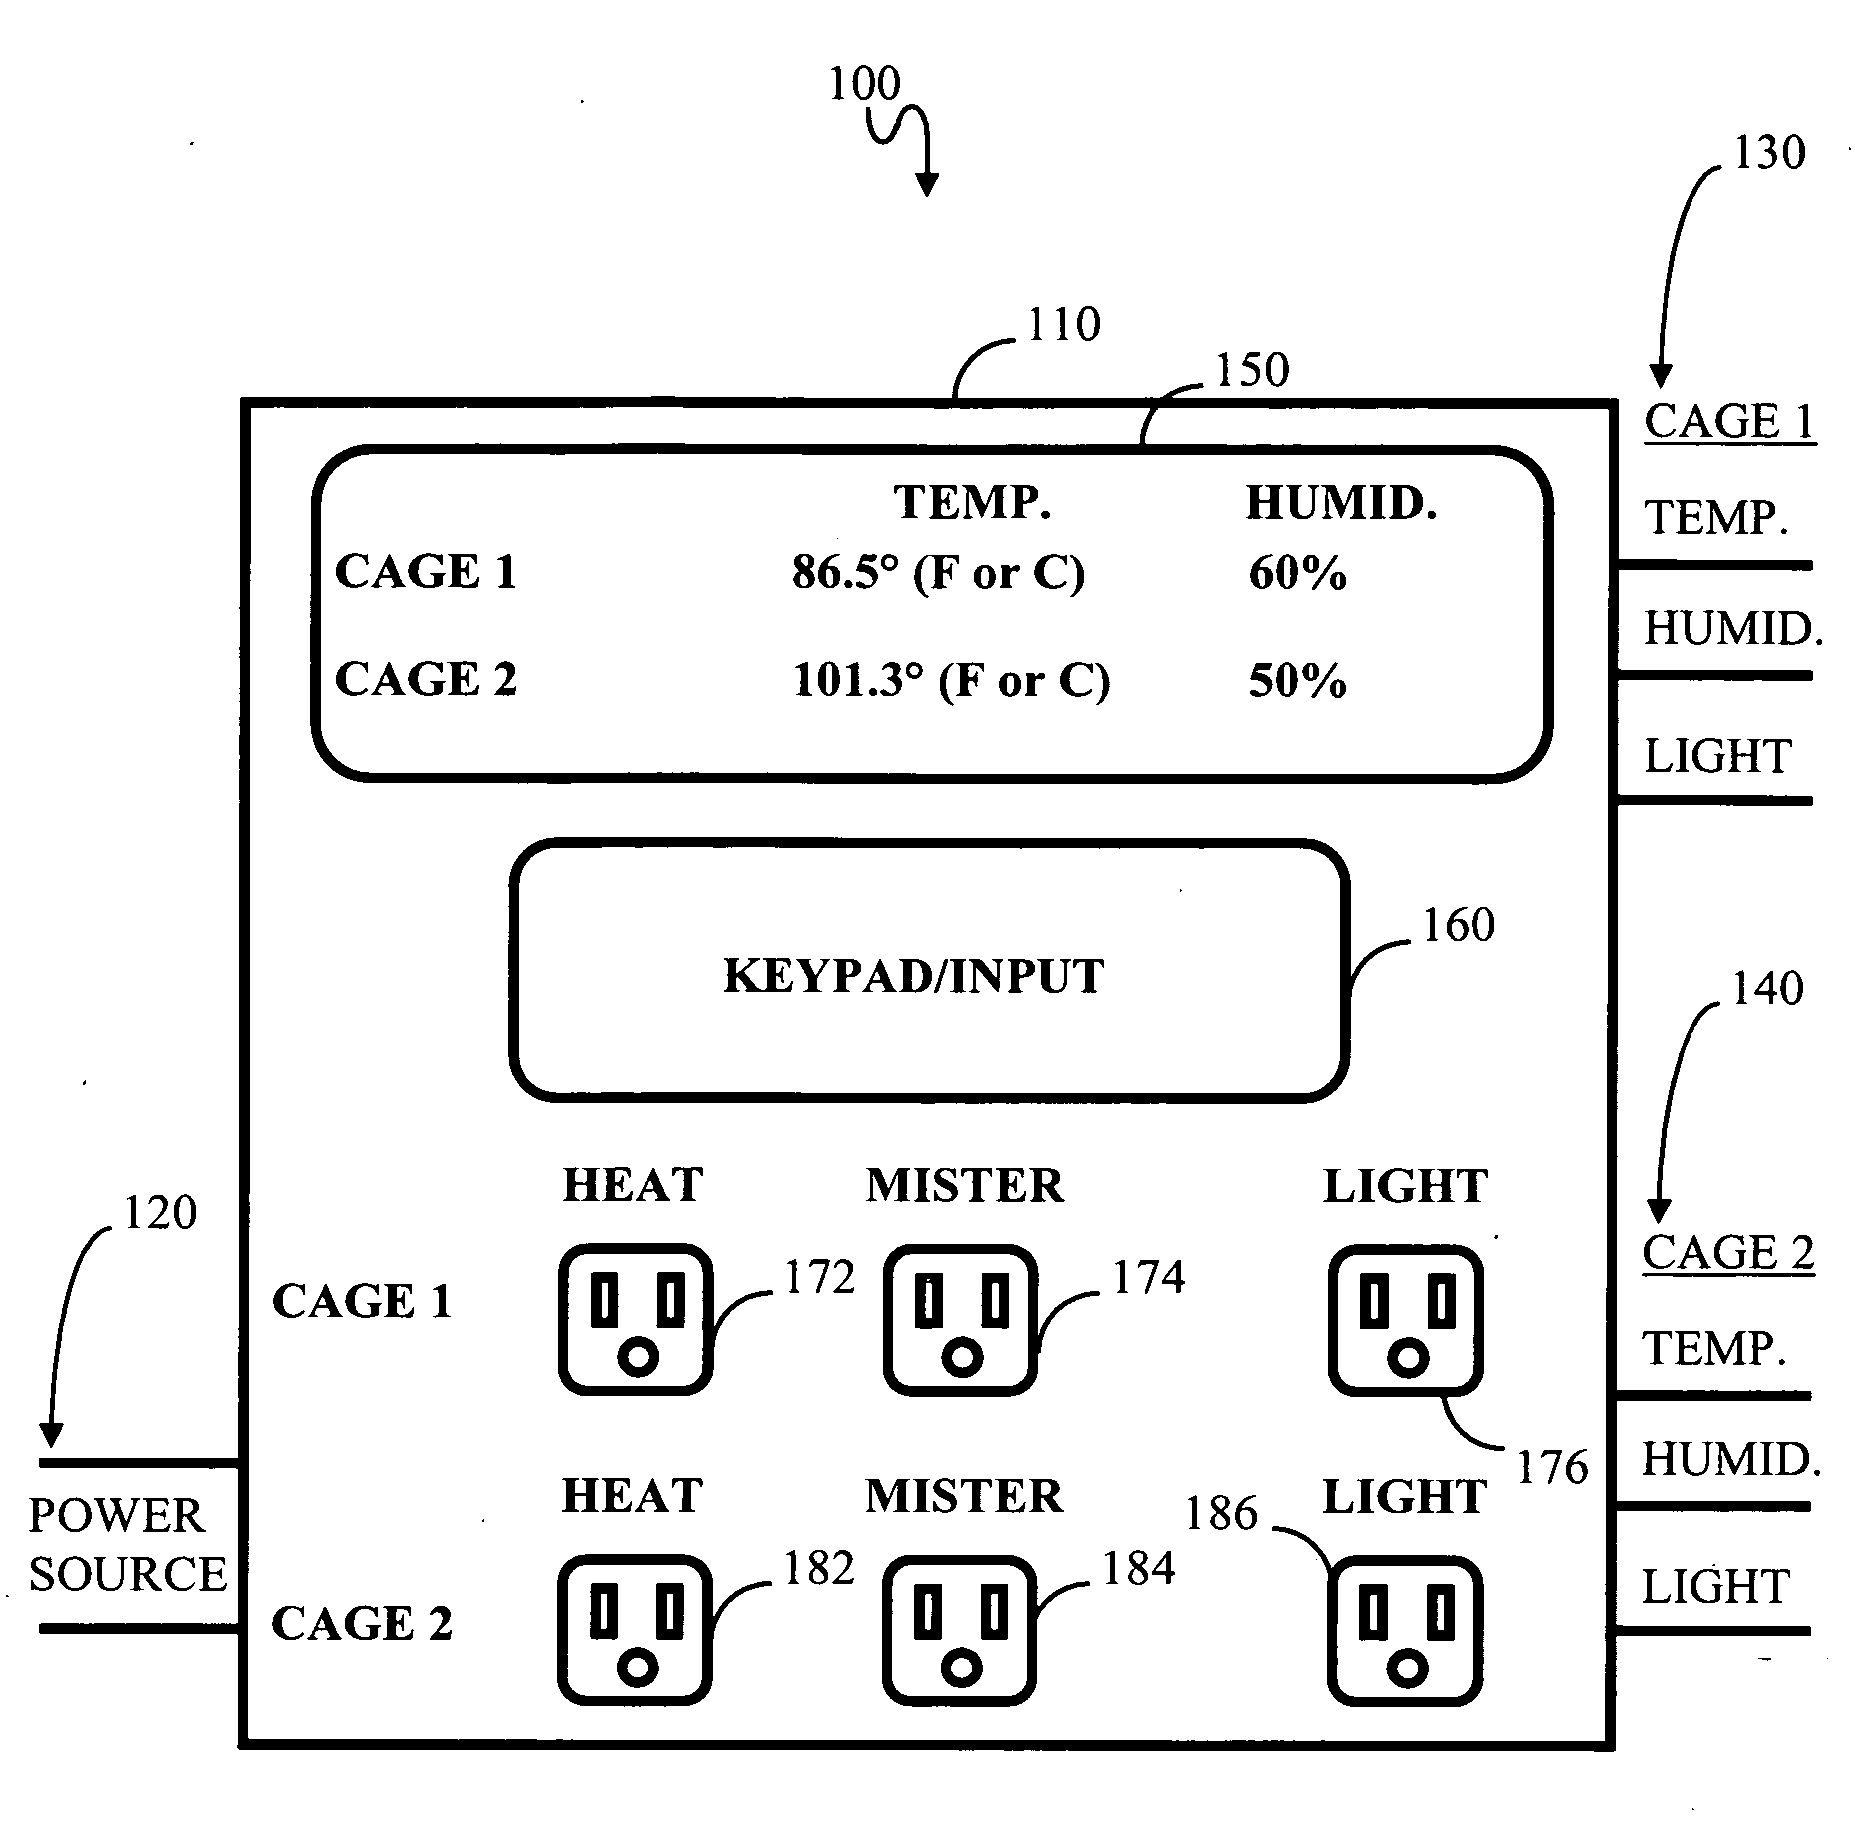 Apparatus for remotely controlling the environment of multiple animal cages